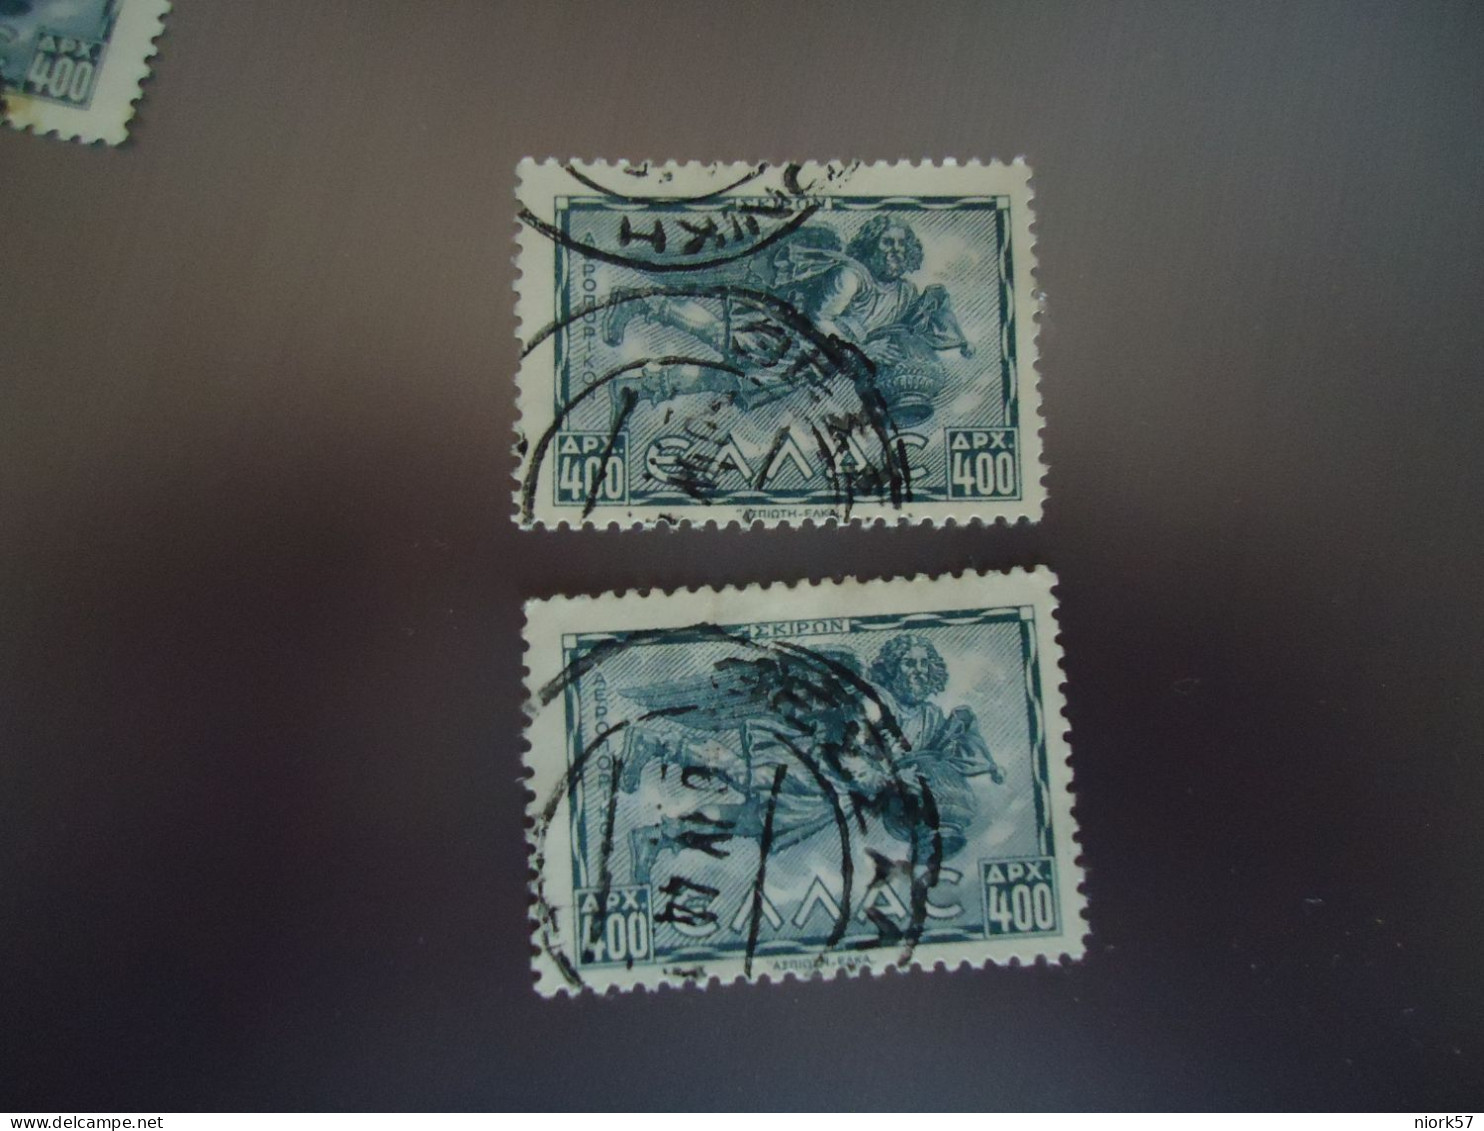 GREECE  USED  2  STAMPS  1943  AIR WINDS - Vignette [ATM]